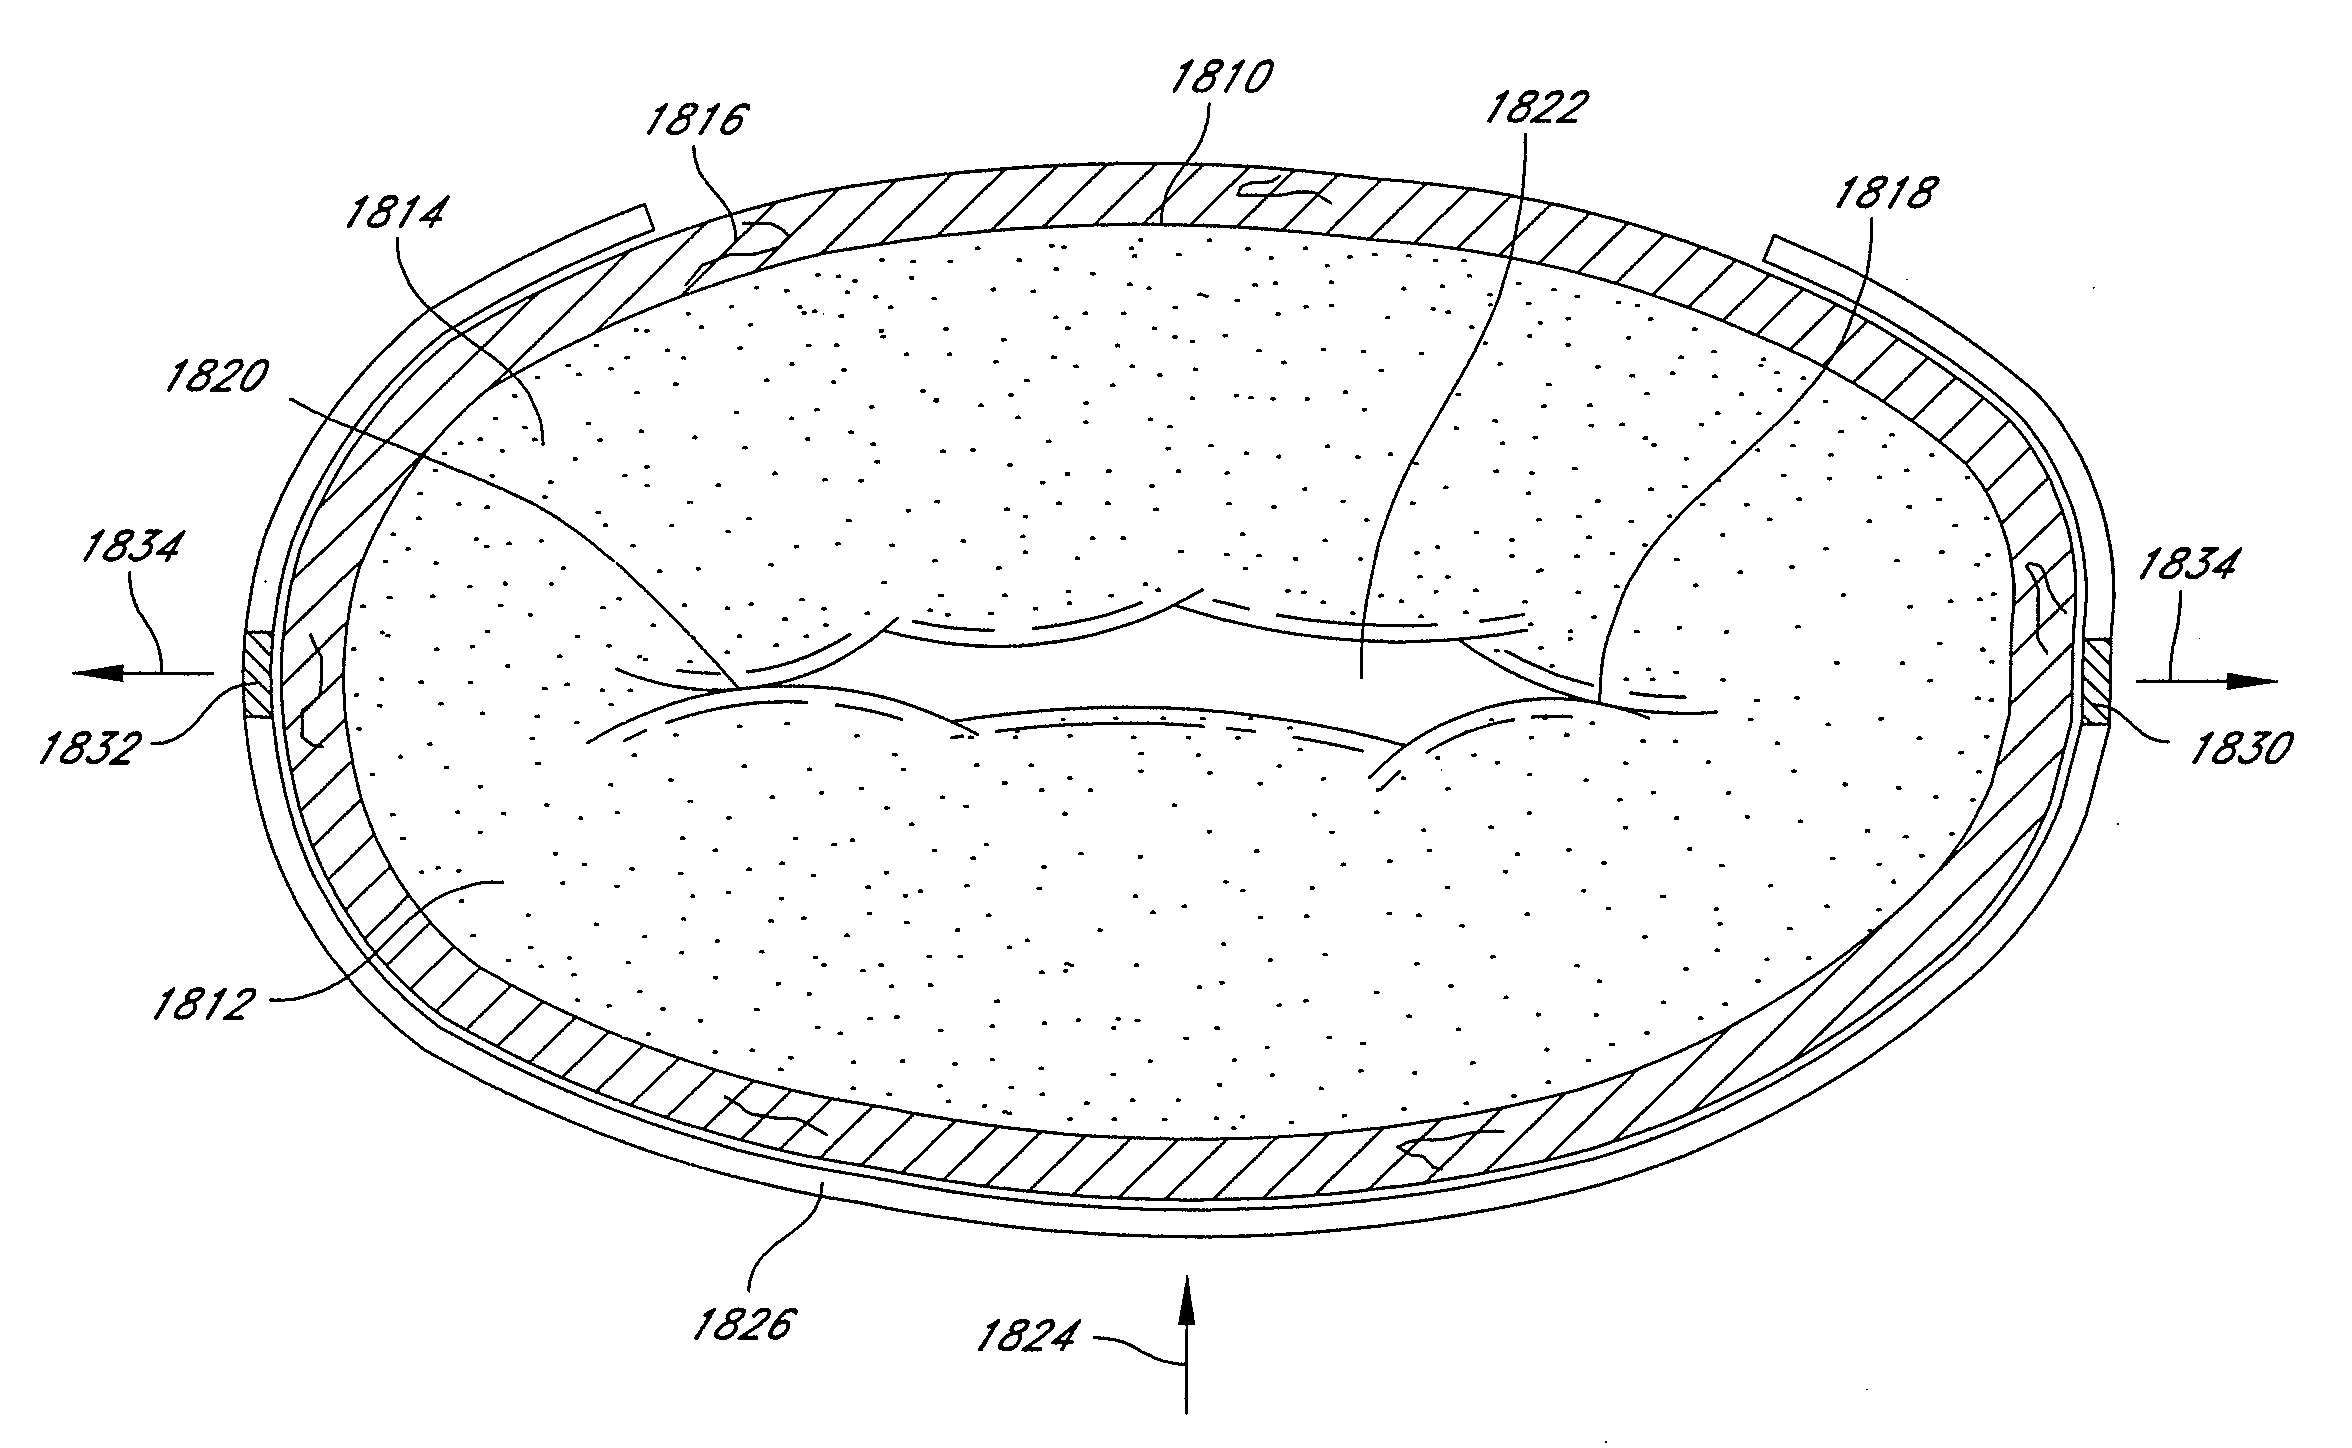 Adjustable annuloplasty ring and activation system